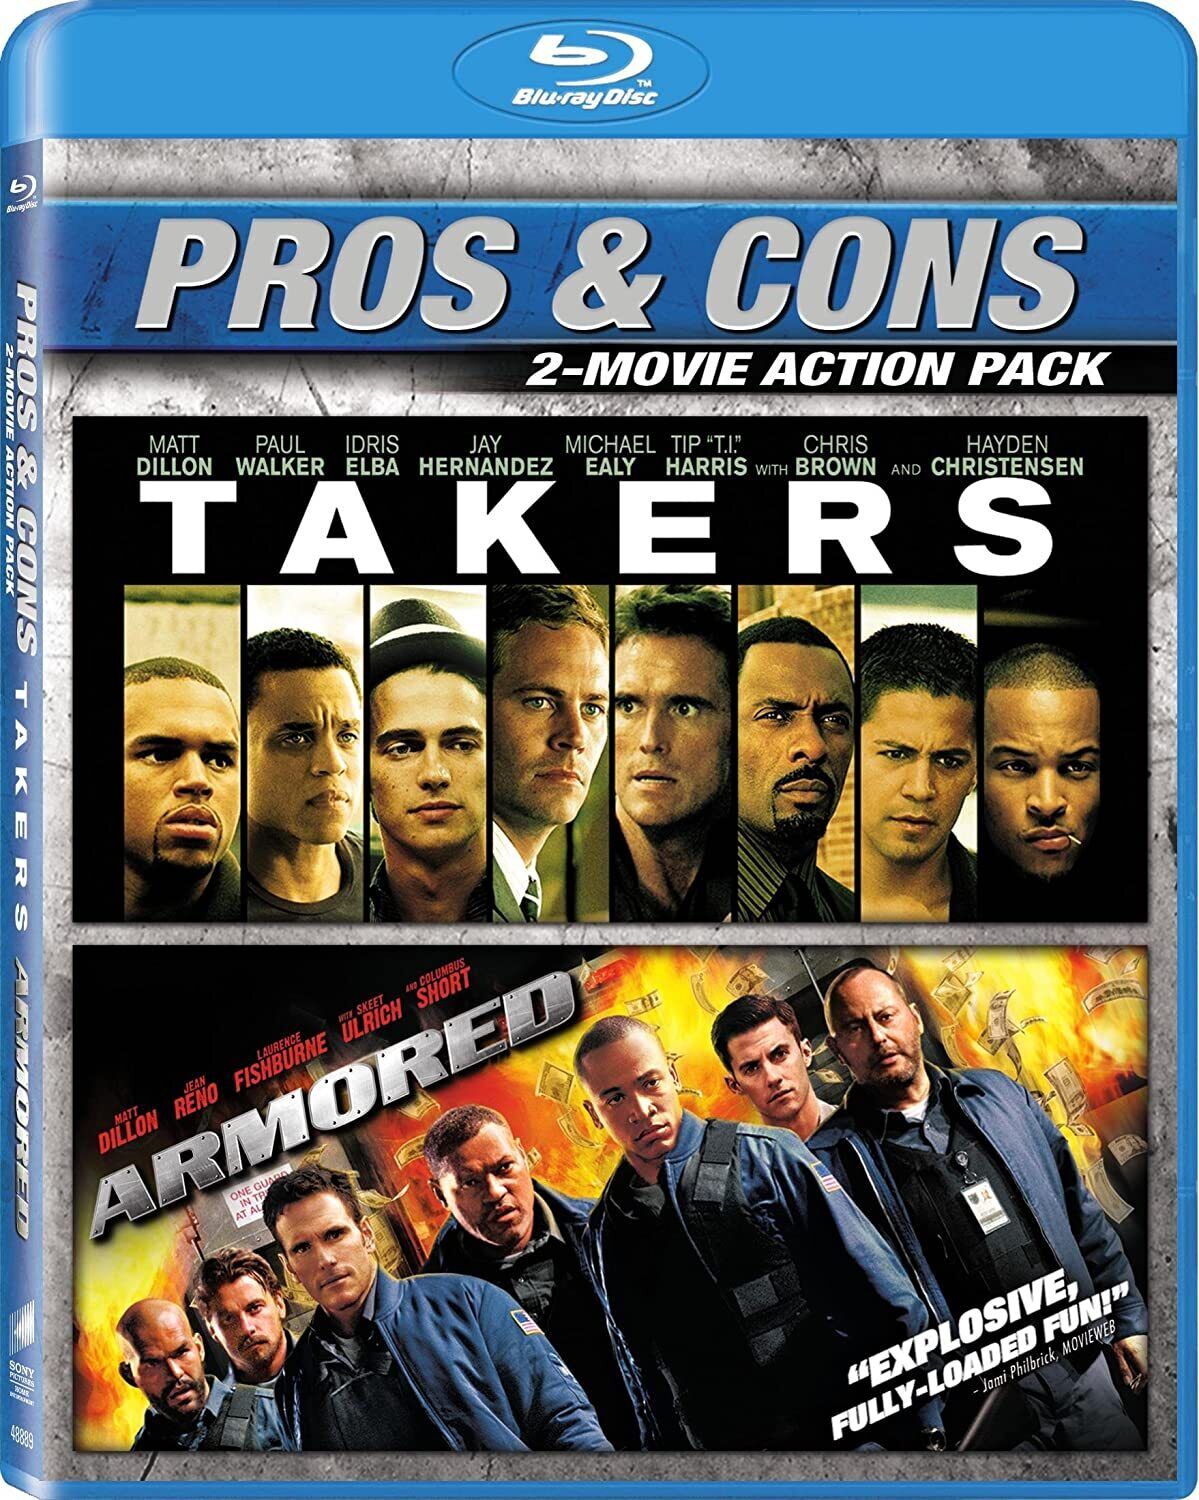 alex keaton recommends takers full movie online free pic